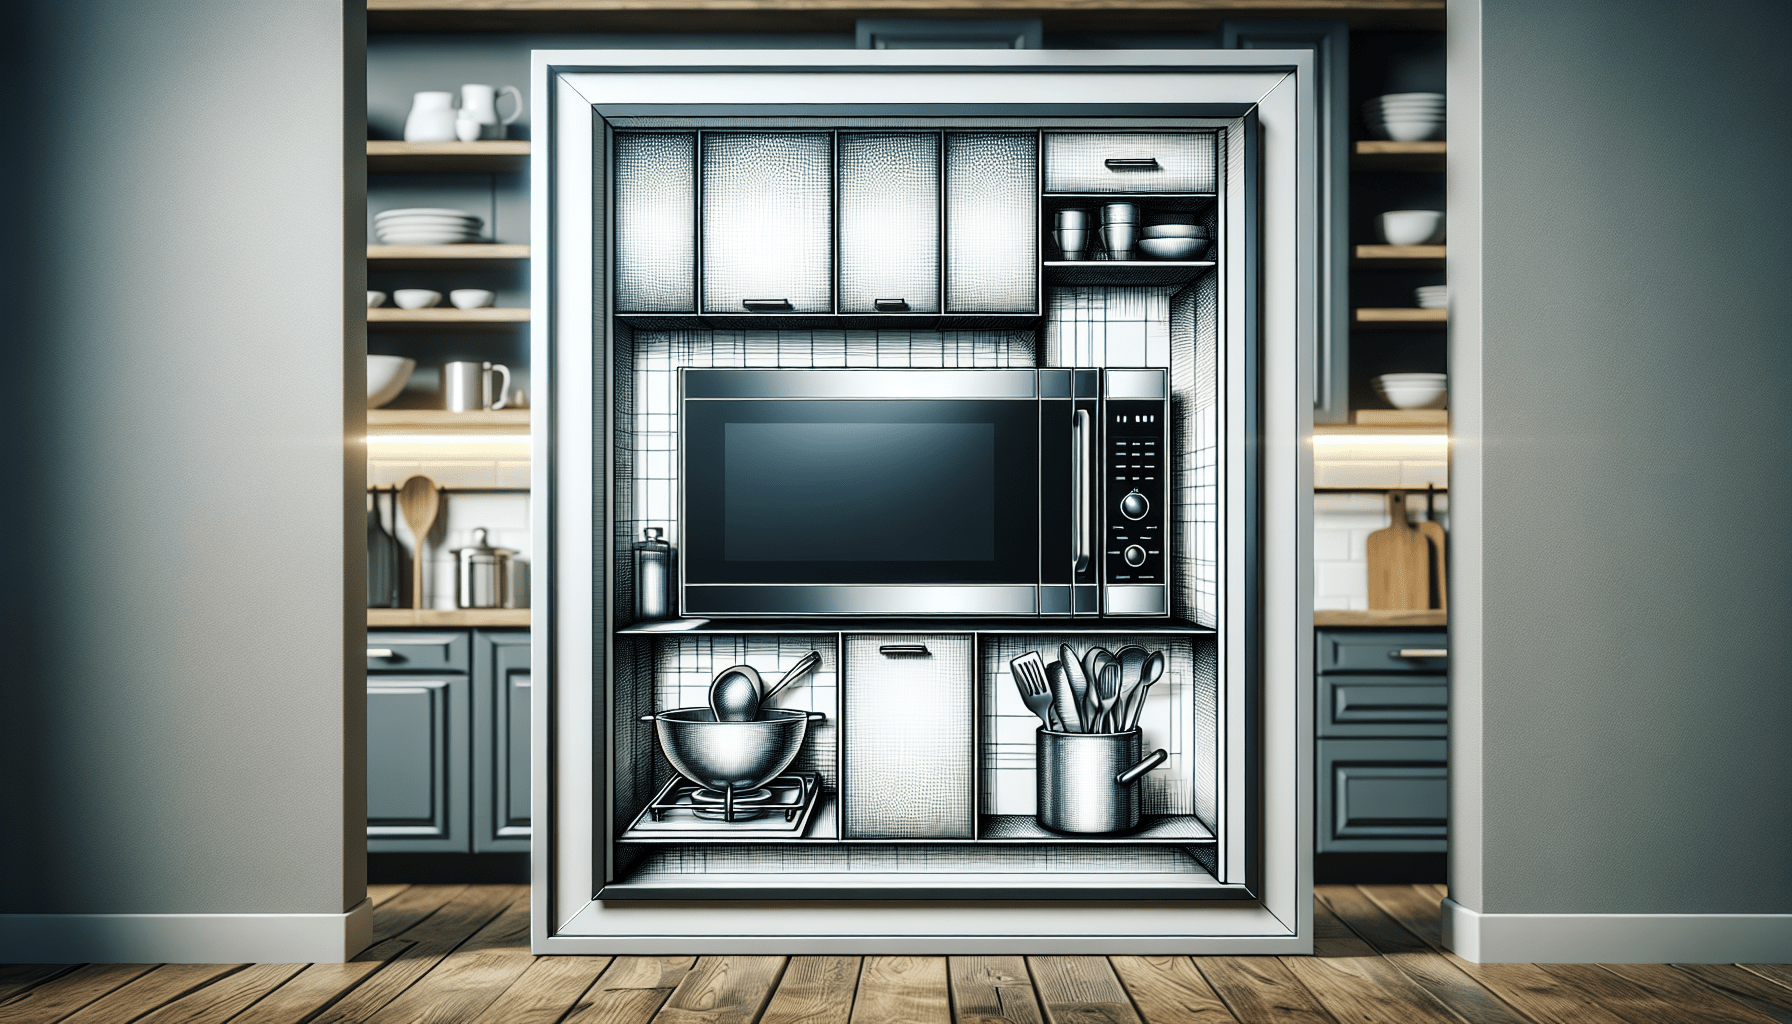 What Are The Benefits Of A Built-in Microwave?